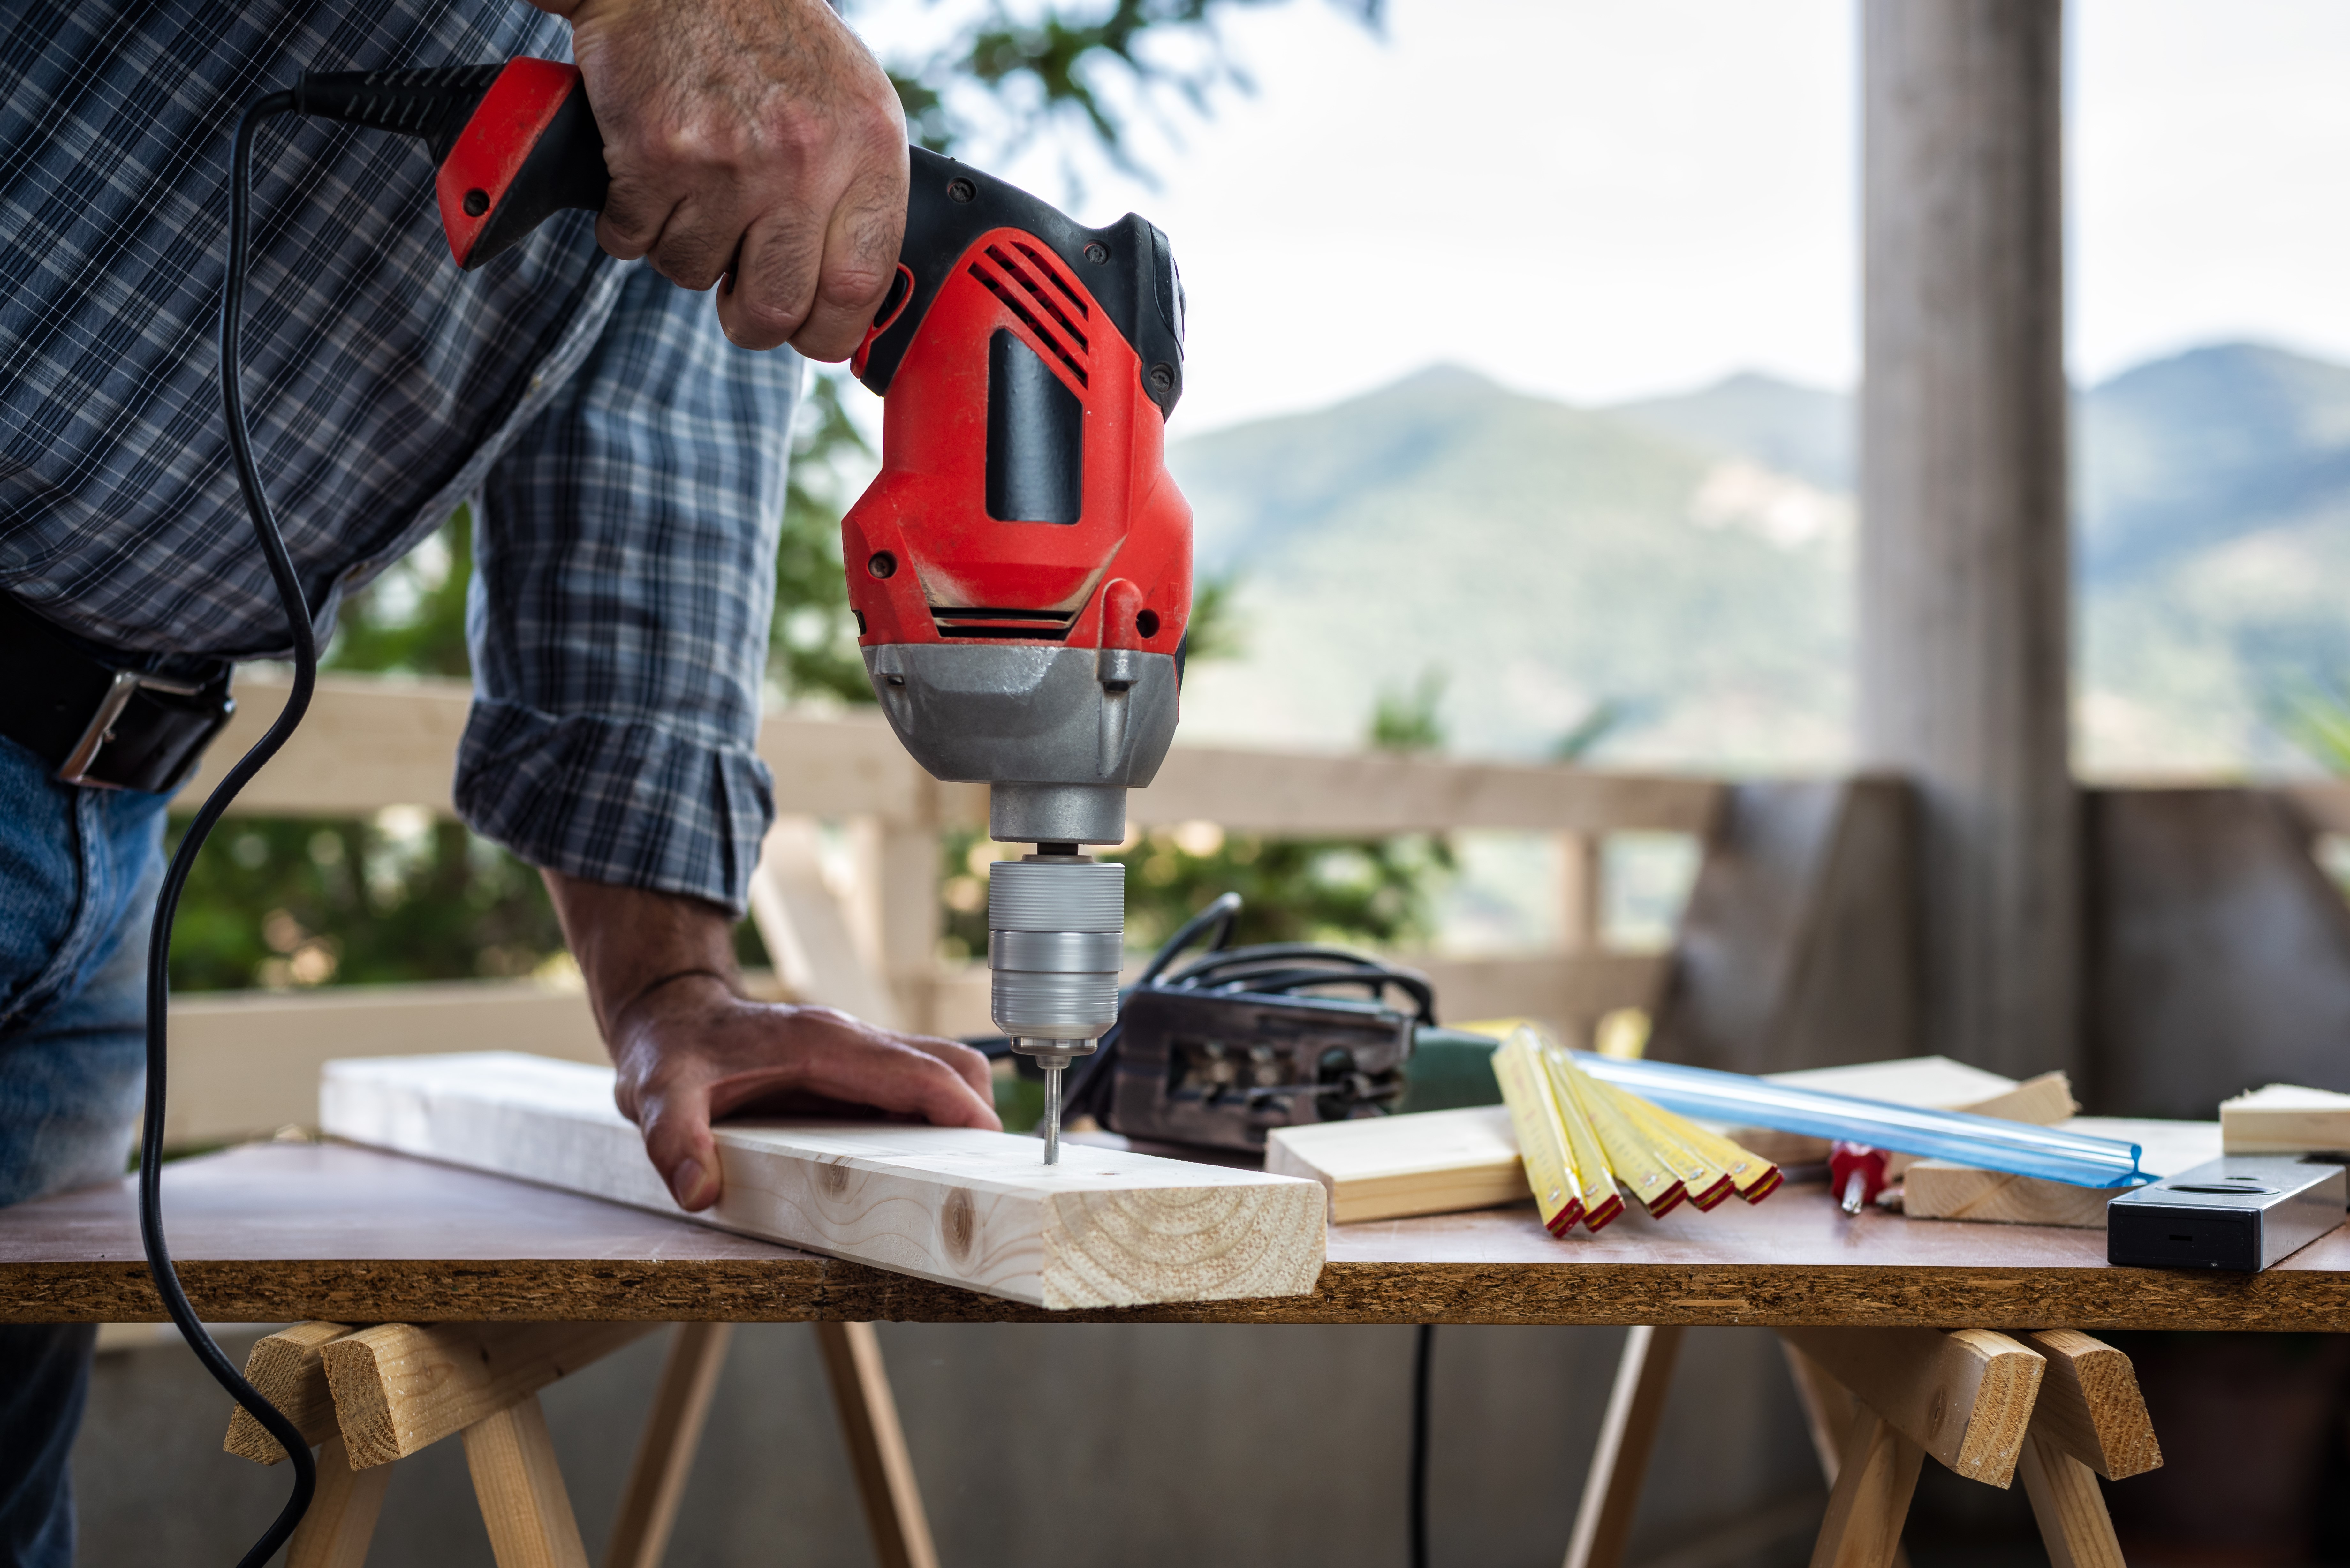 How Much Does A Handyman Make?